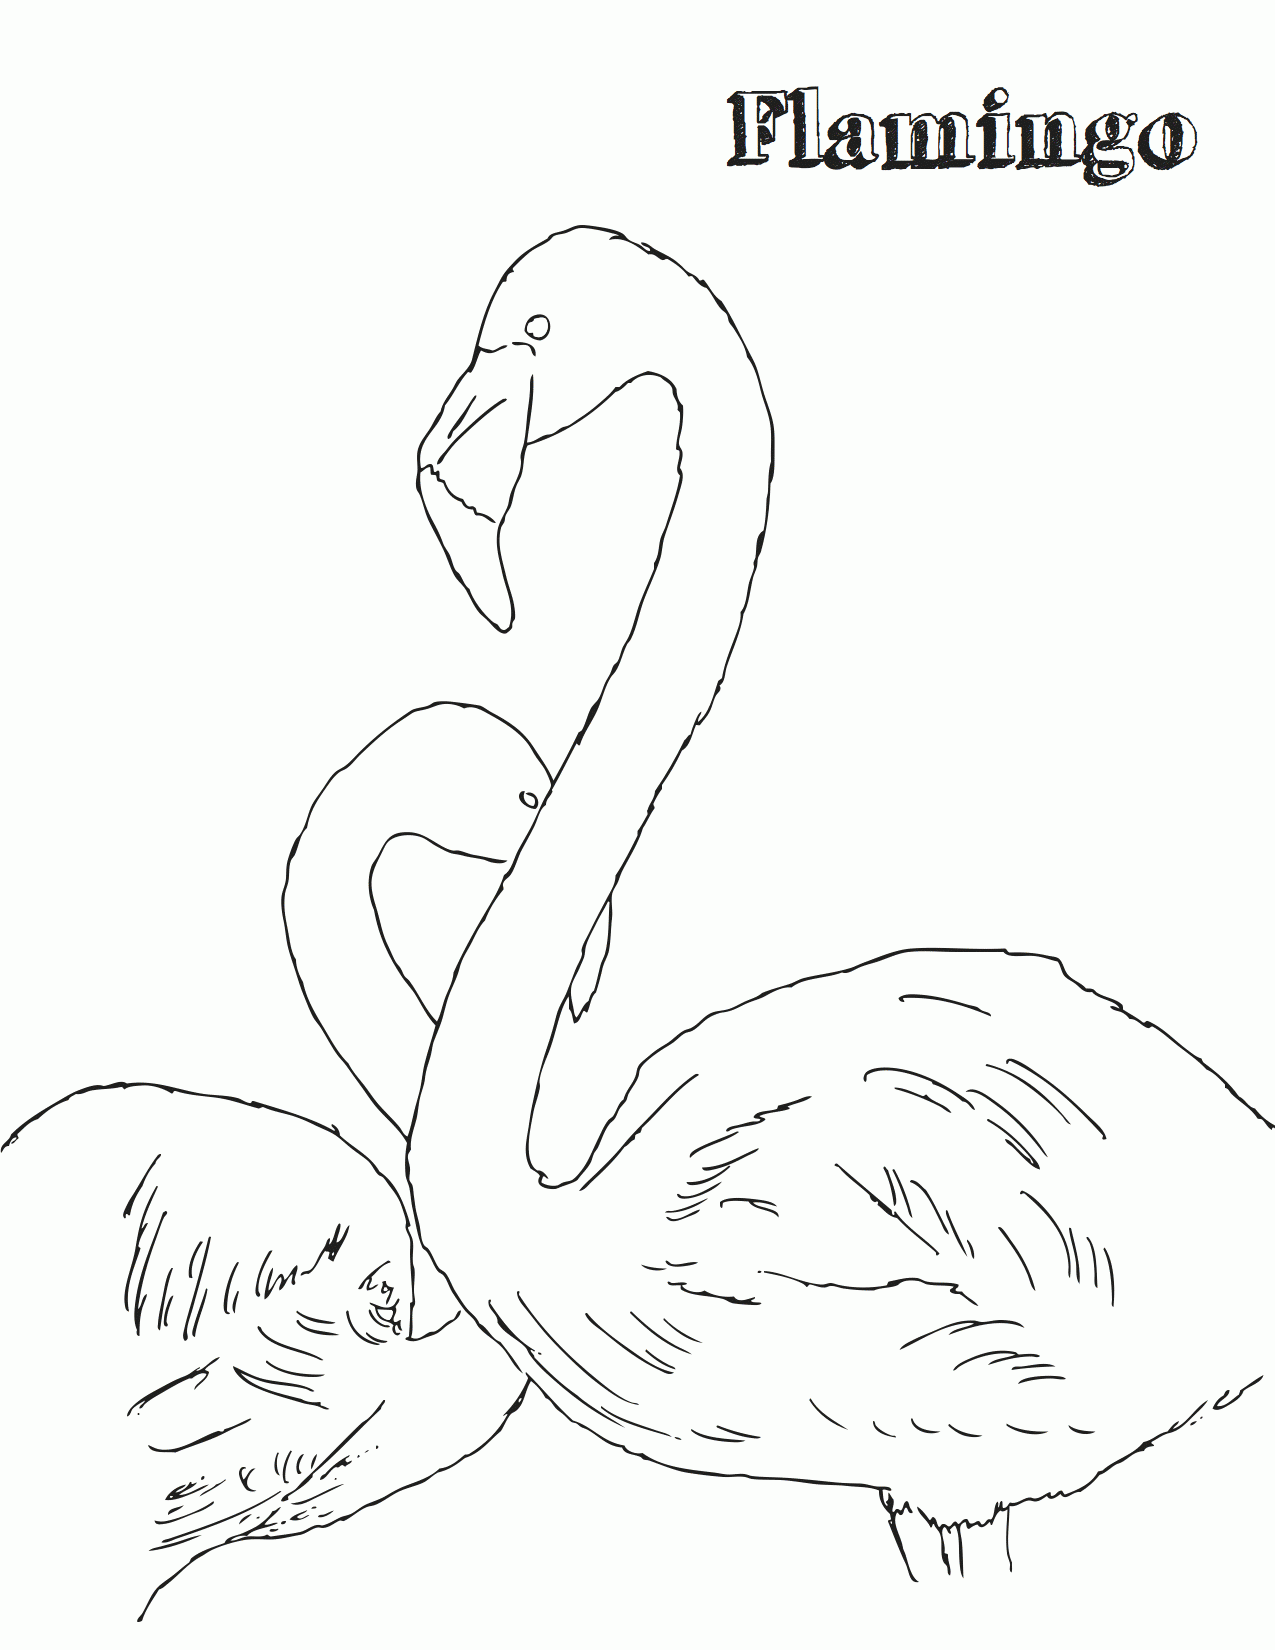 flamingo coloring page | Doodles Ave